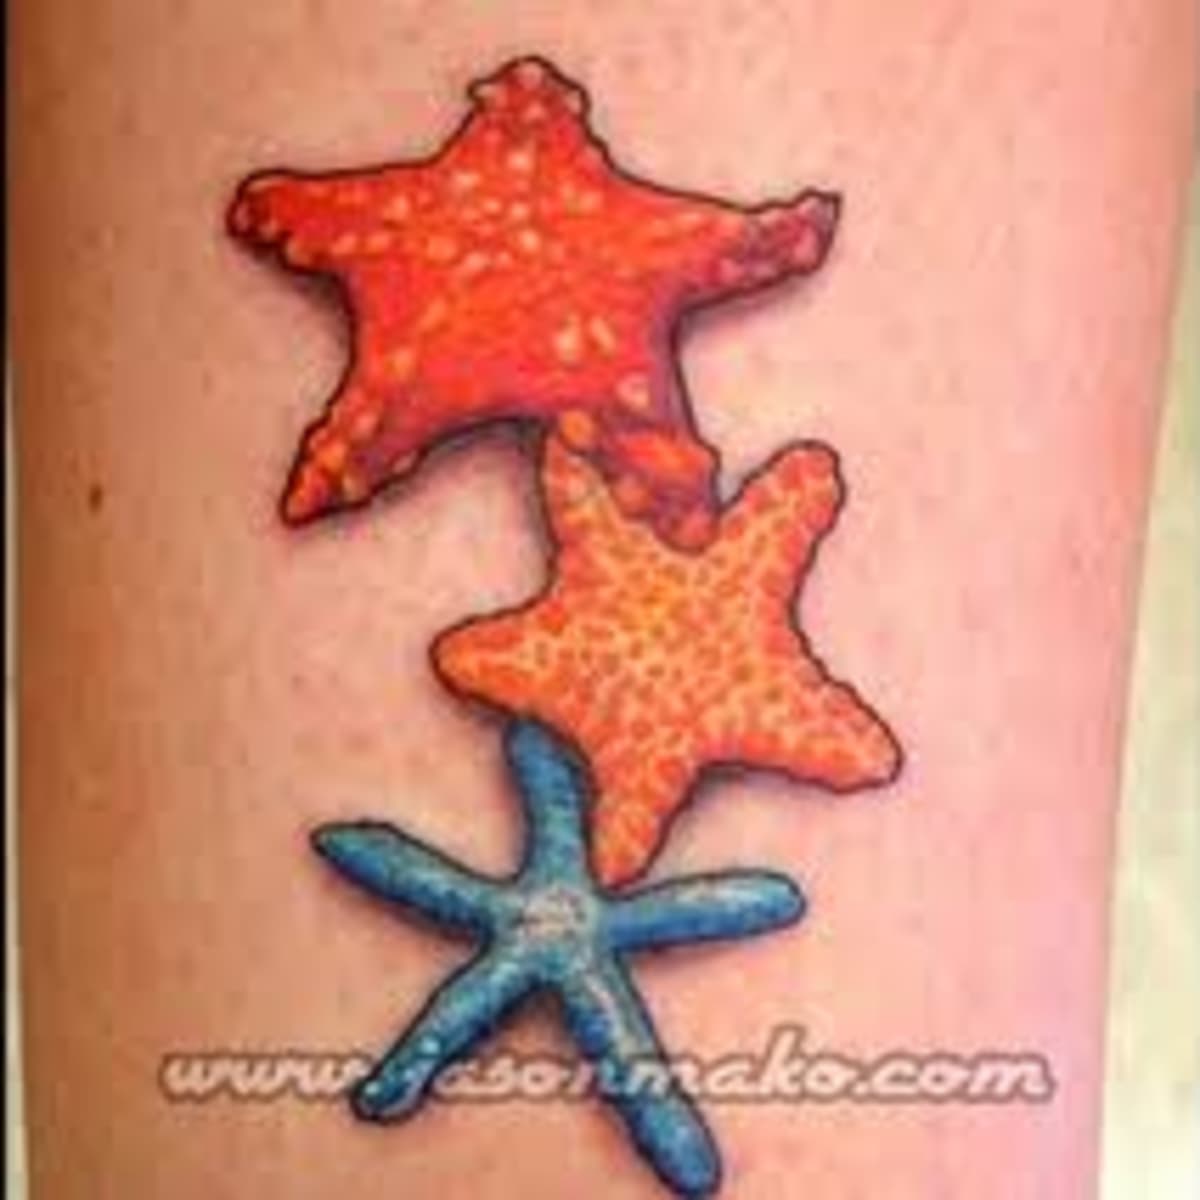 Ornamental north star tattooed on the back of the neck.